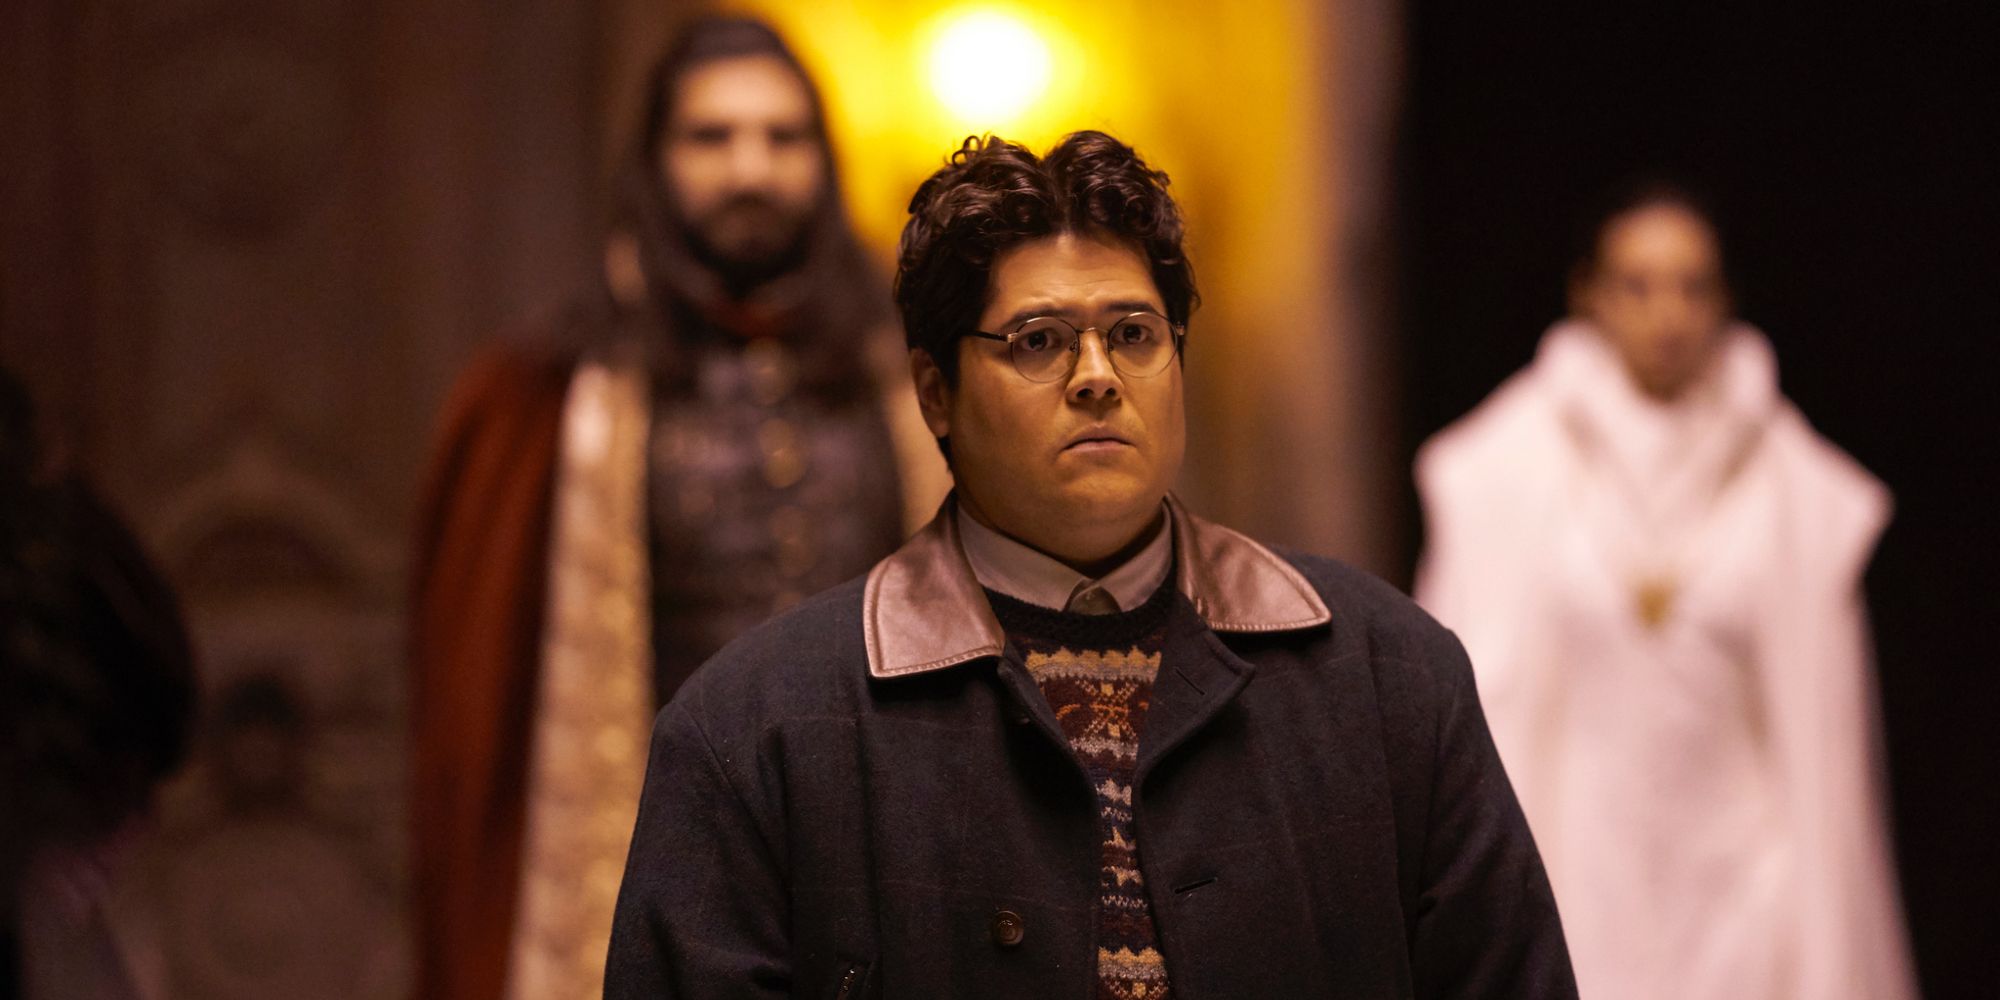 Guillermo stands looking sad as the vampires stand behind him in What We Do in the Shadows.